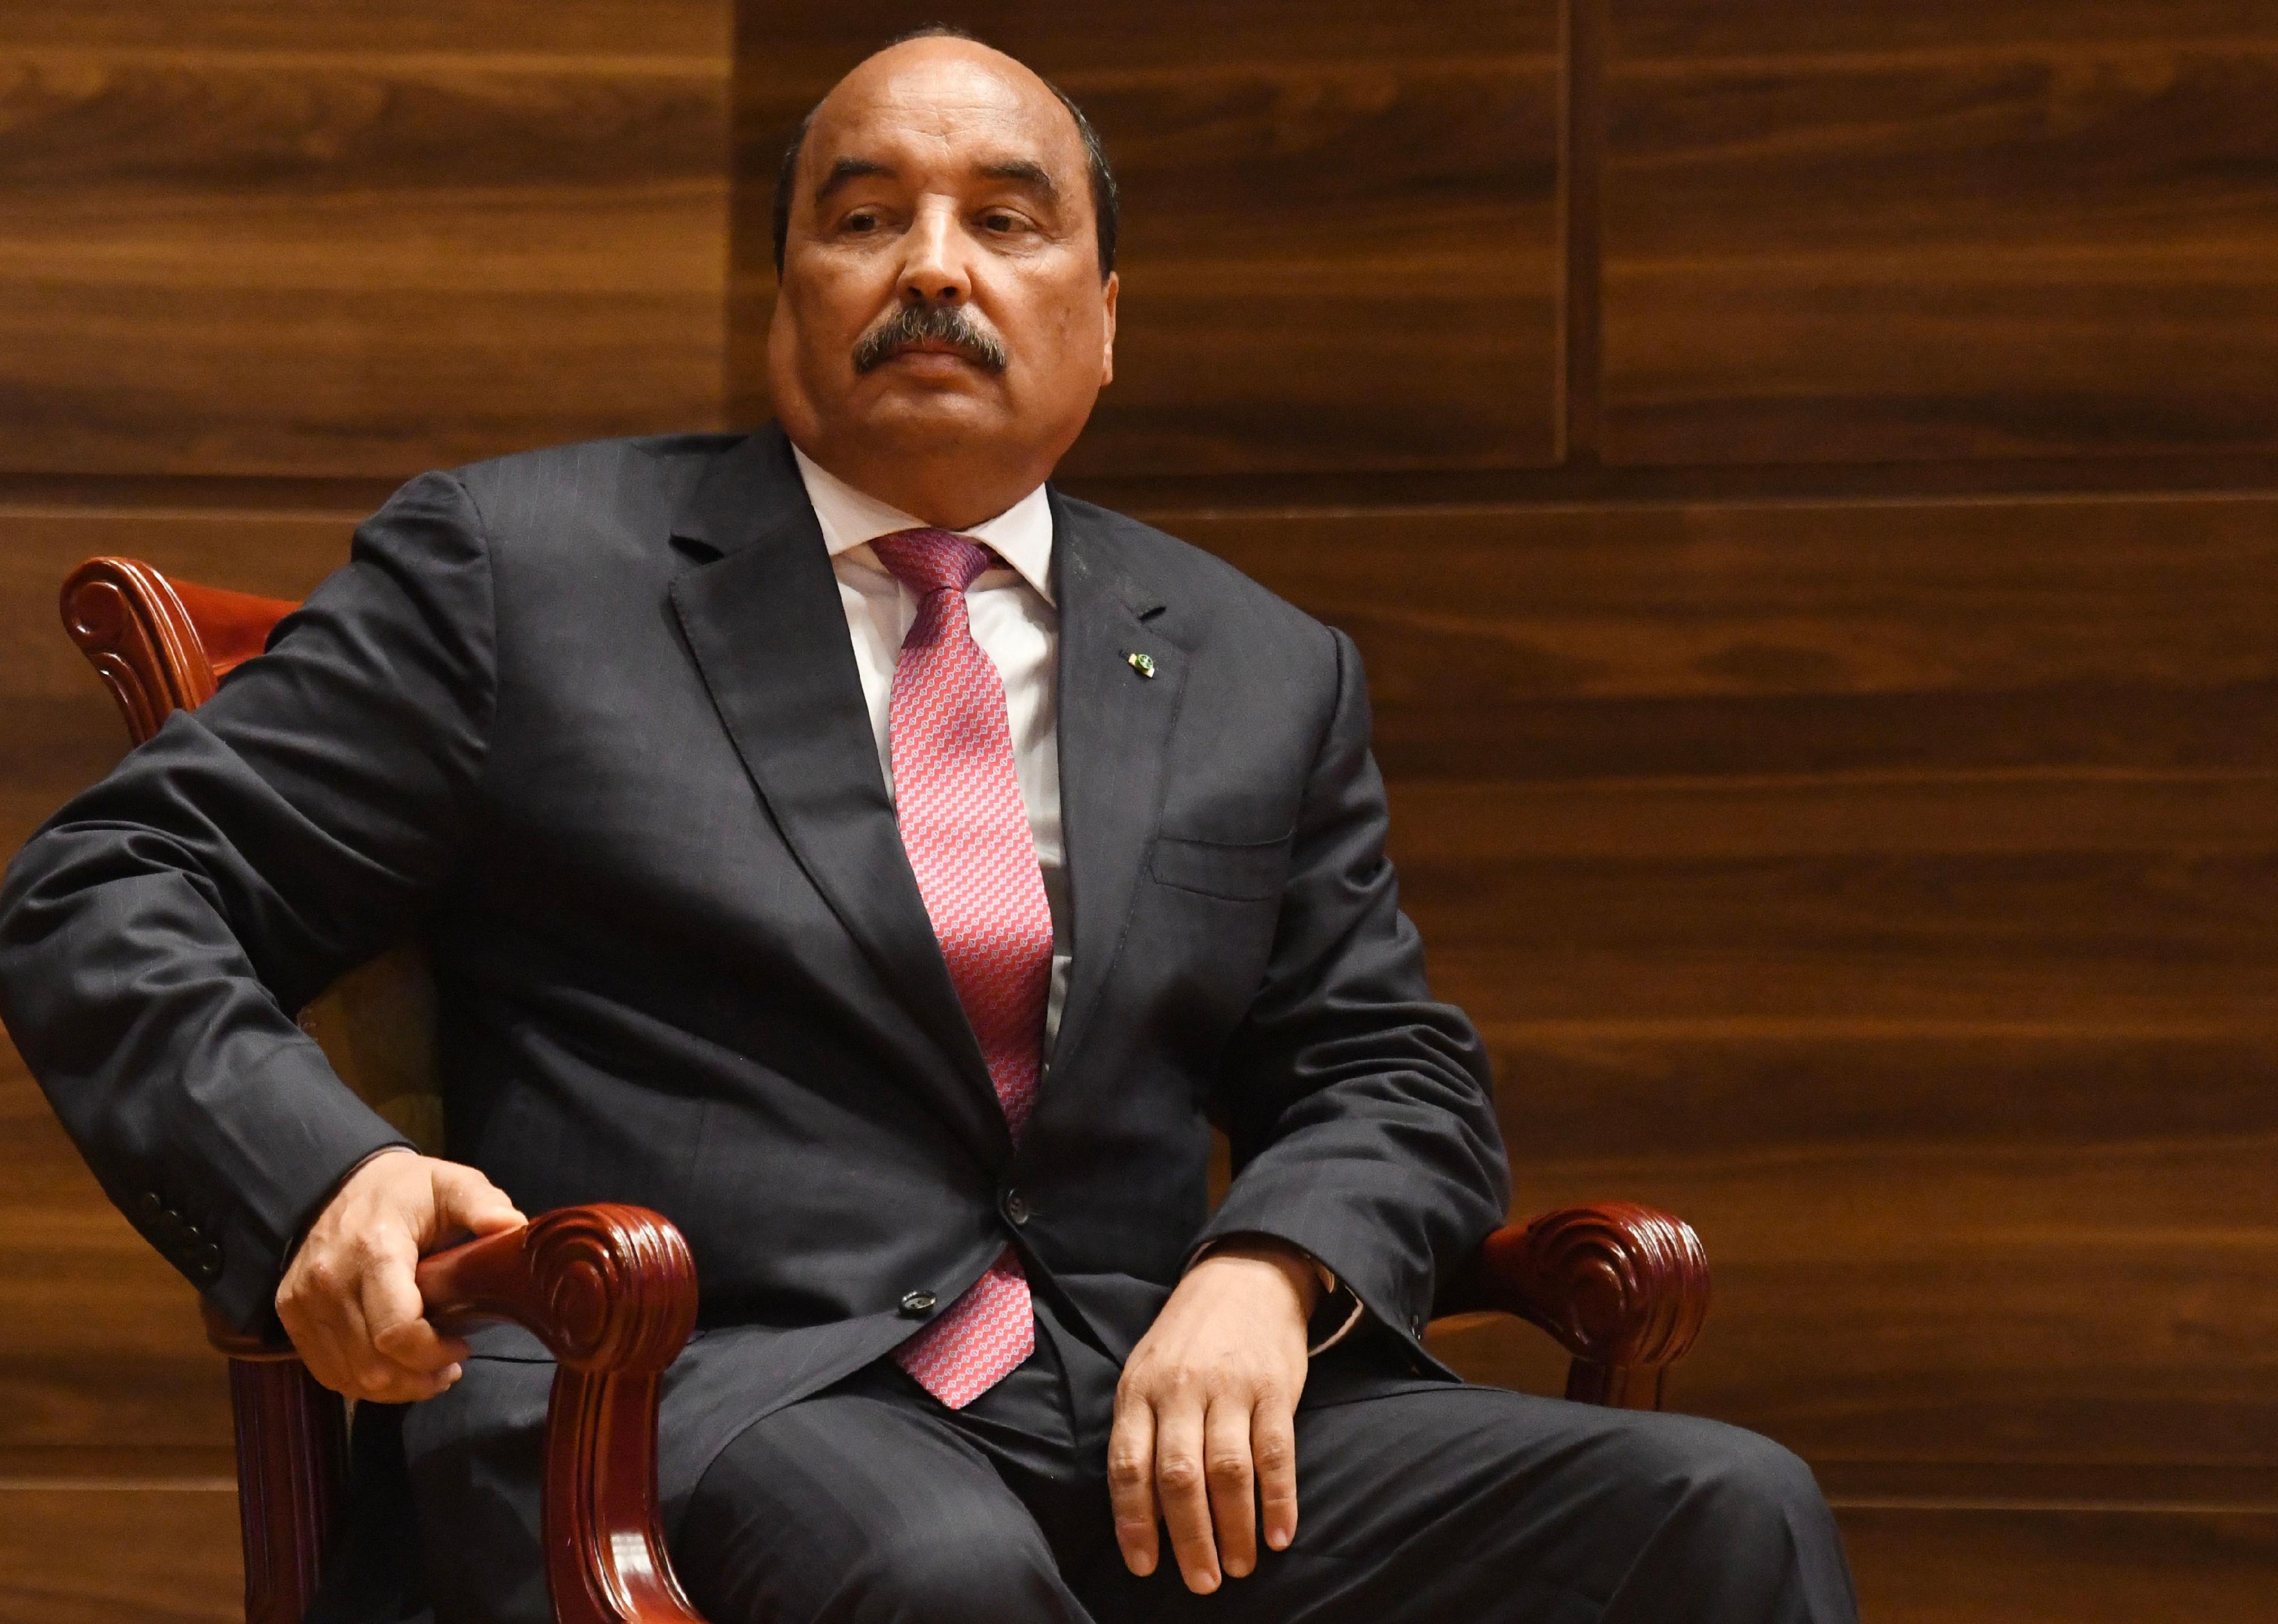 Mohamed Ould Abdel Aziz looks on during the swearing-in ceremony of the newly-elected Mauritania